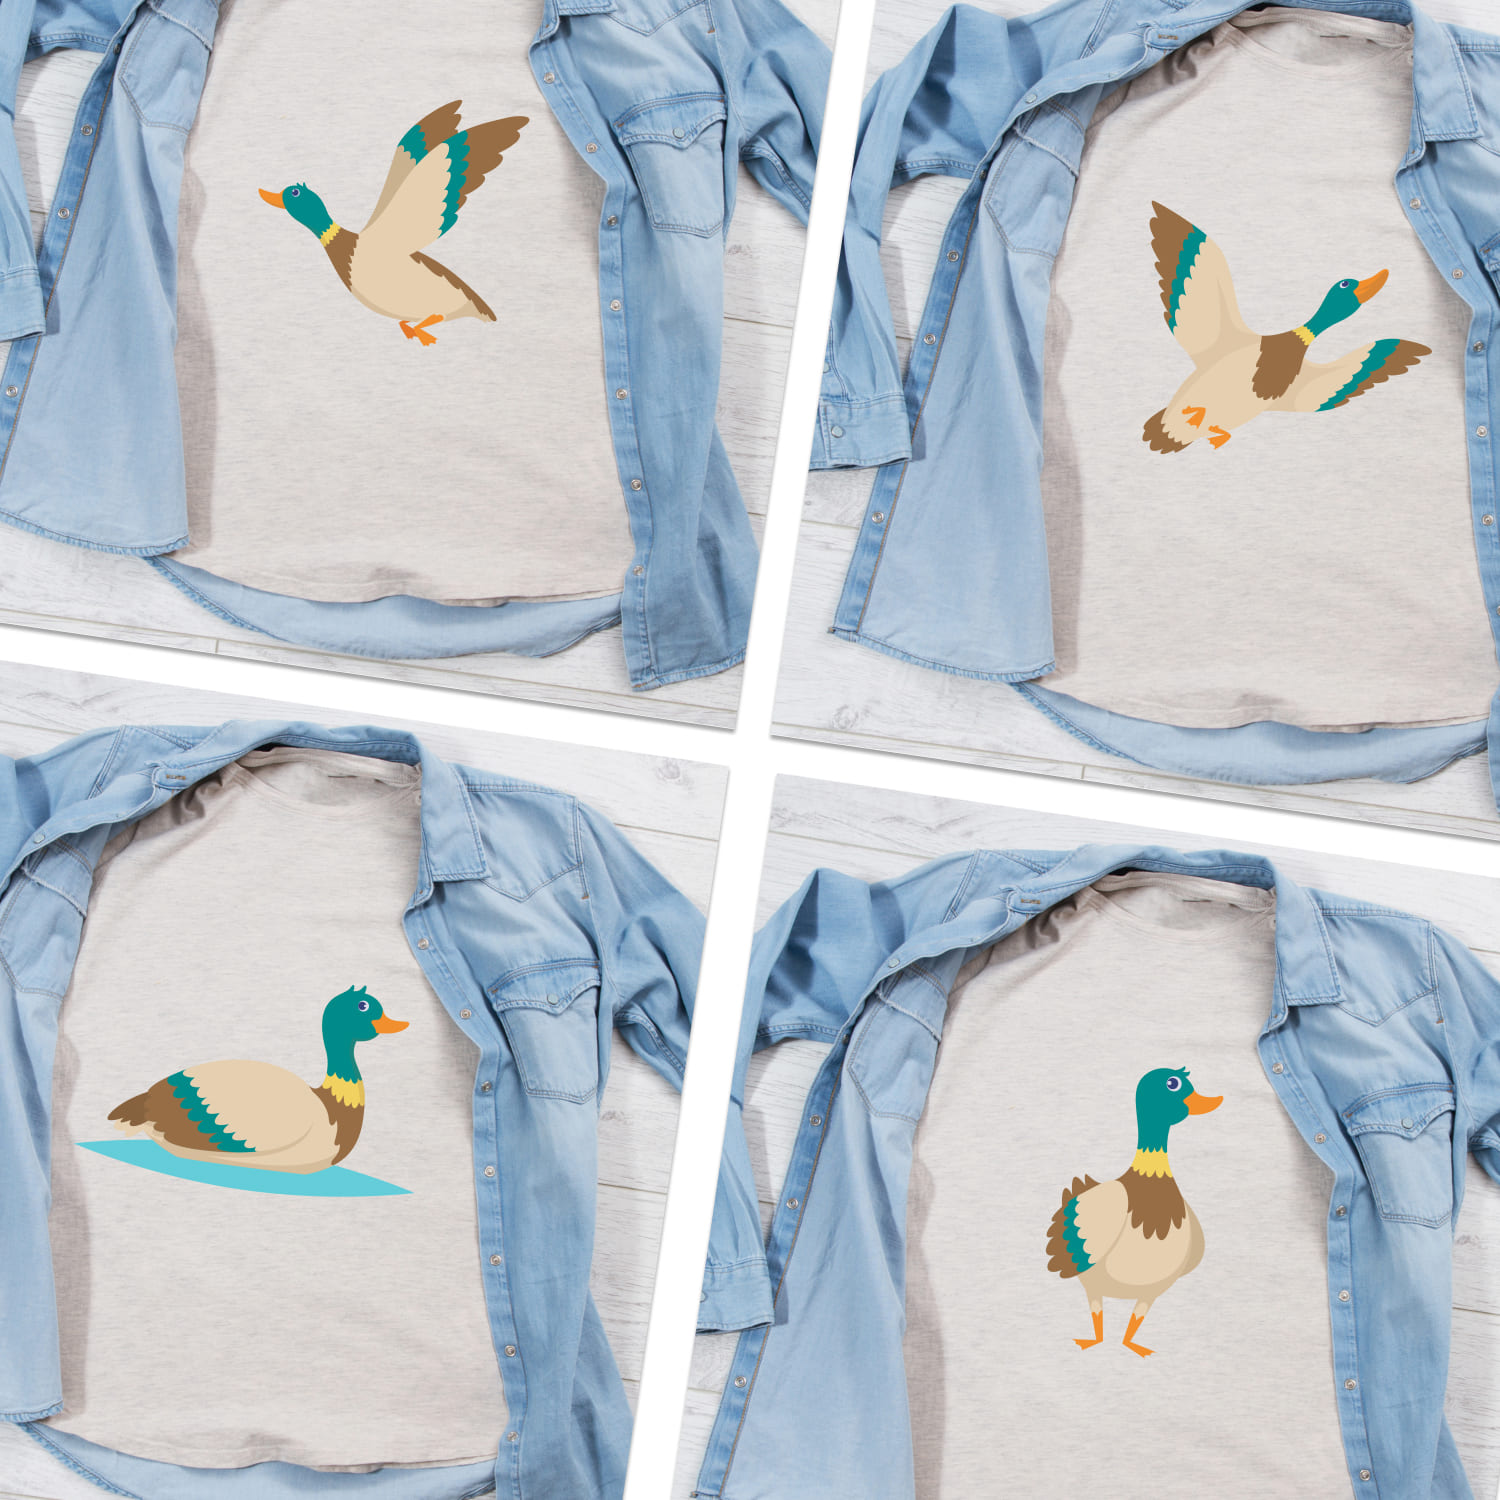 A pack of images of t-shirts with wonderful flying duck prints.